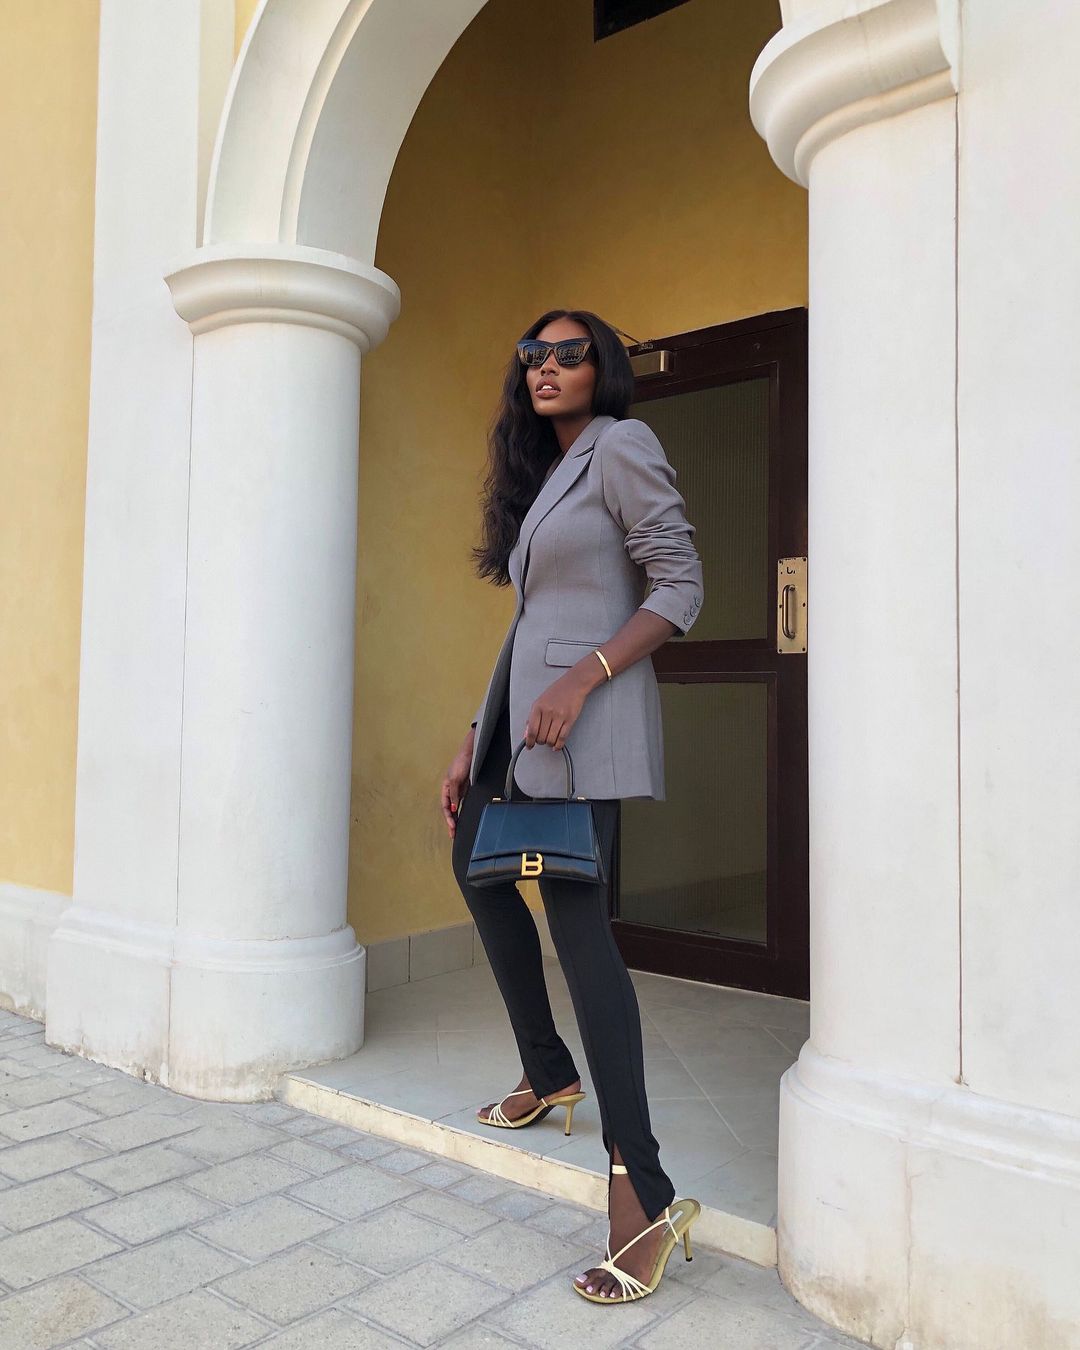 Stephanie's Fashion Moments Will Jazz Up Your Style This Week! | BellaNaija